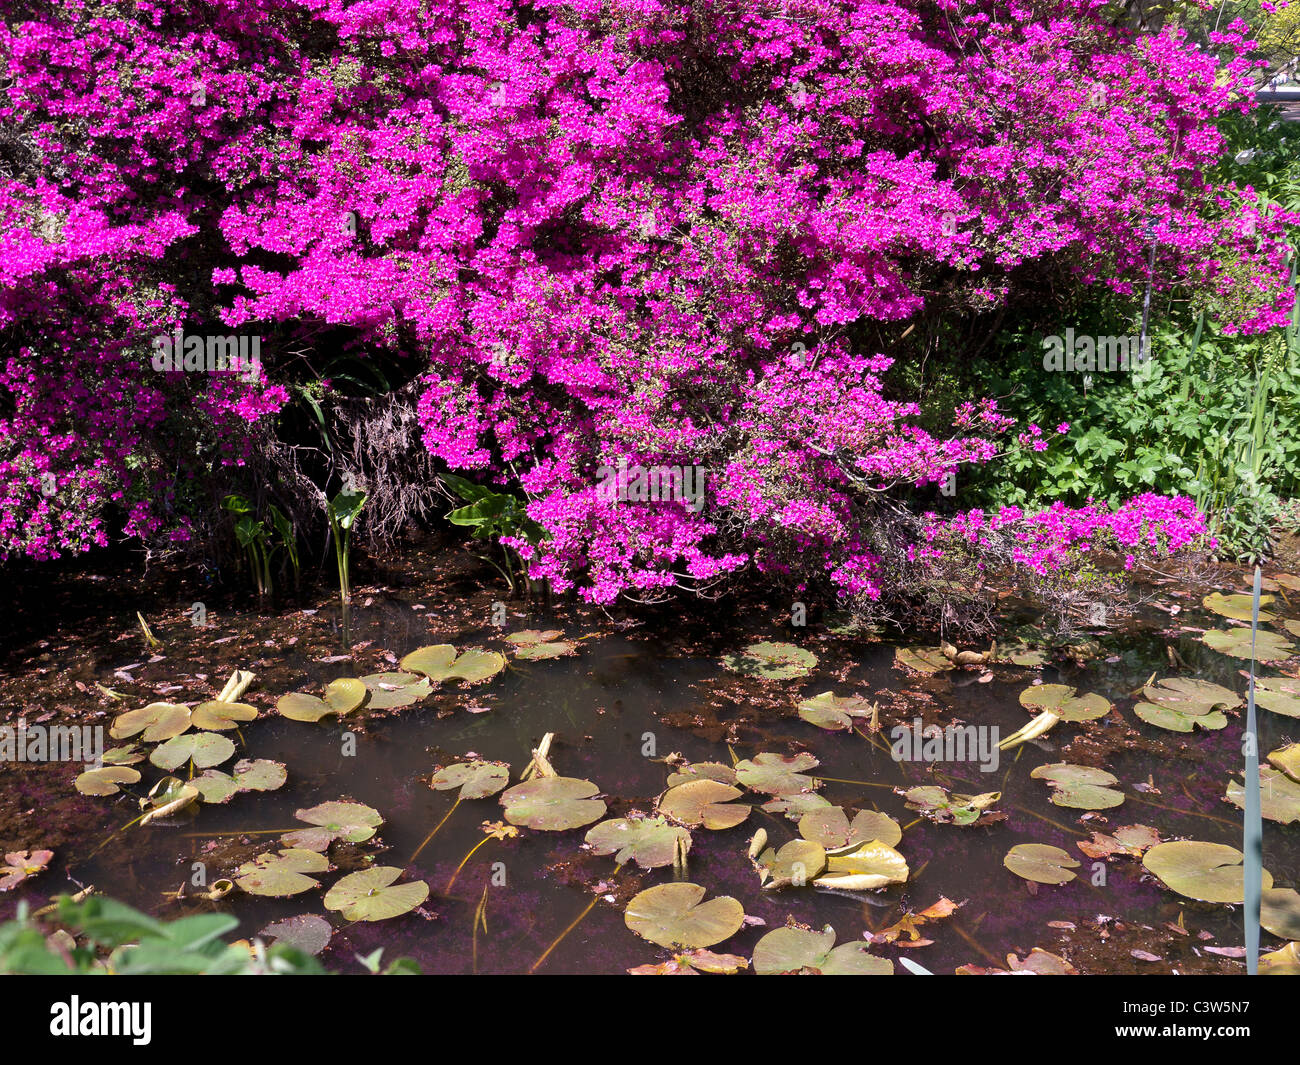 Azaleas, Rhododendrons  and water lilies in the Royal Horticultural Society  Botanical Gardens, Wisley, United Kingdom Stock Photo